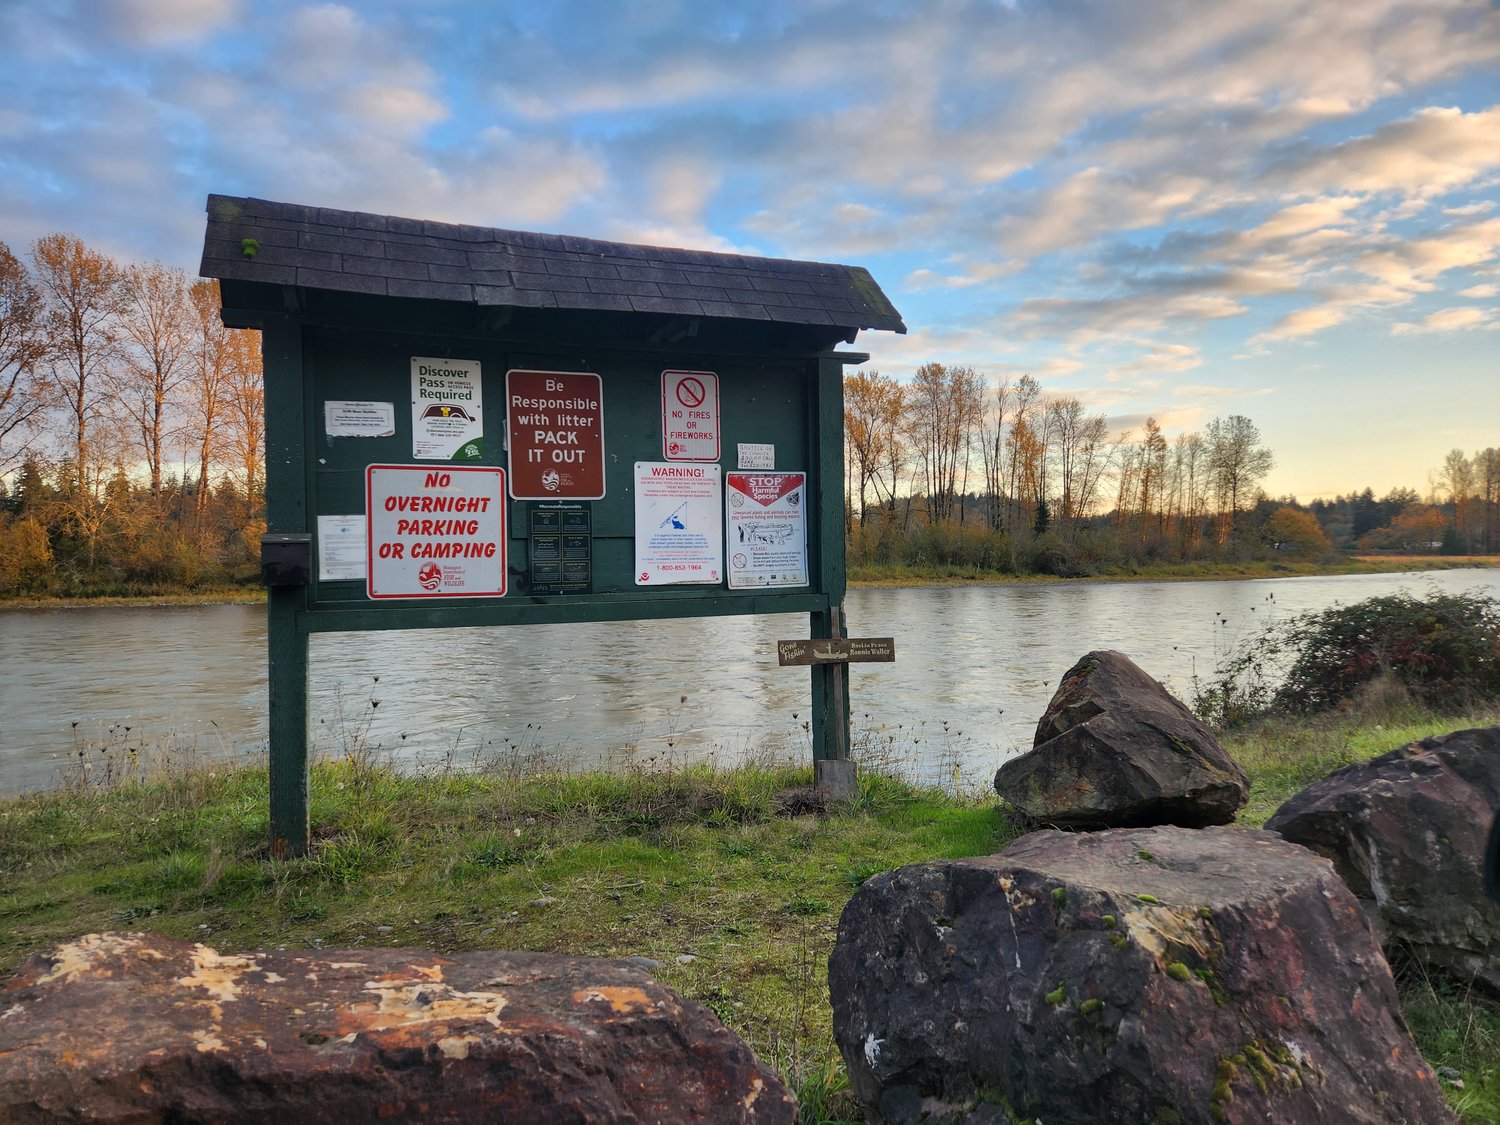 In 1963, Tom and Idris Massey donated a perpetual easement to the Washington Department of Game (now the Department of Fish and Wildlife) to provide permanent access to the Cowlitz River for a boat ramp, today known as Massey Bar Launch Fishing.